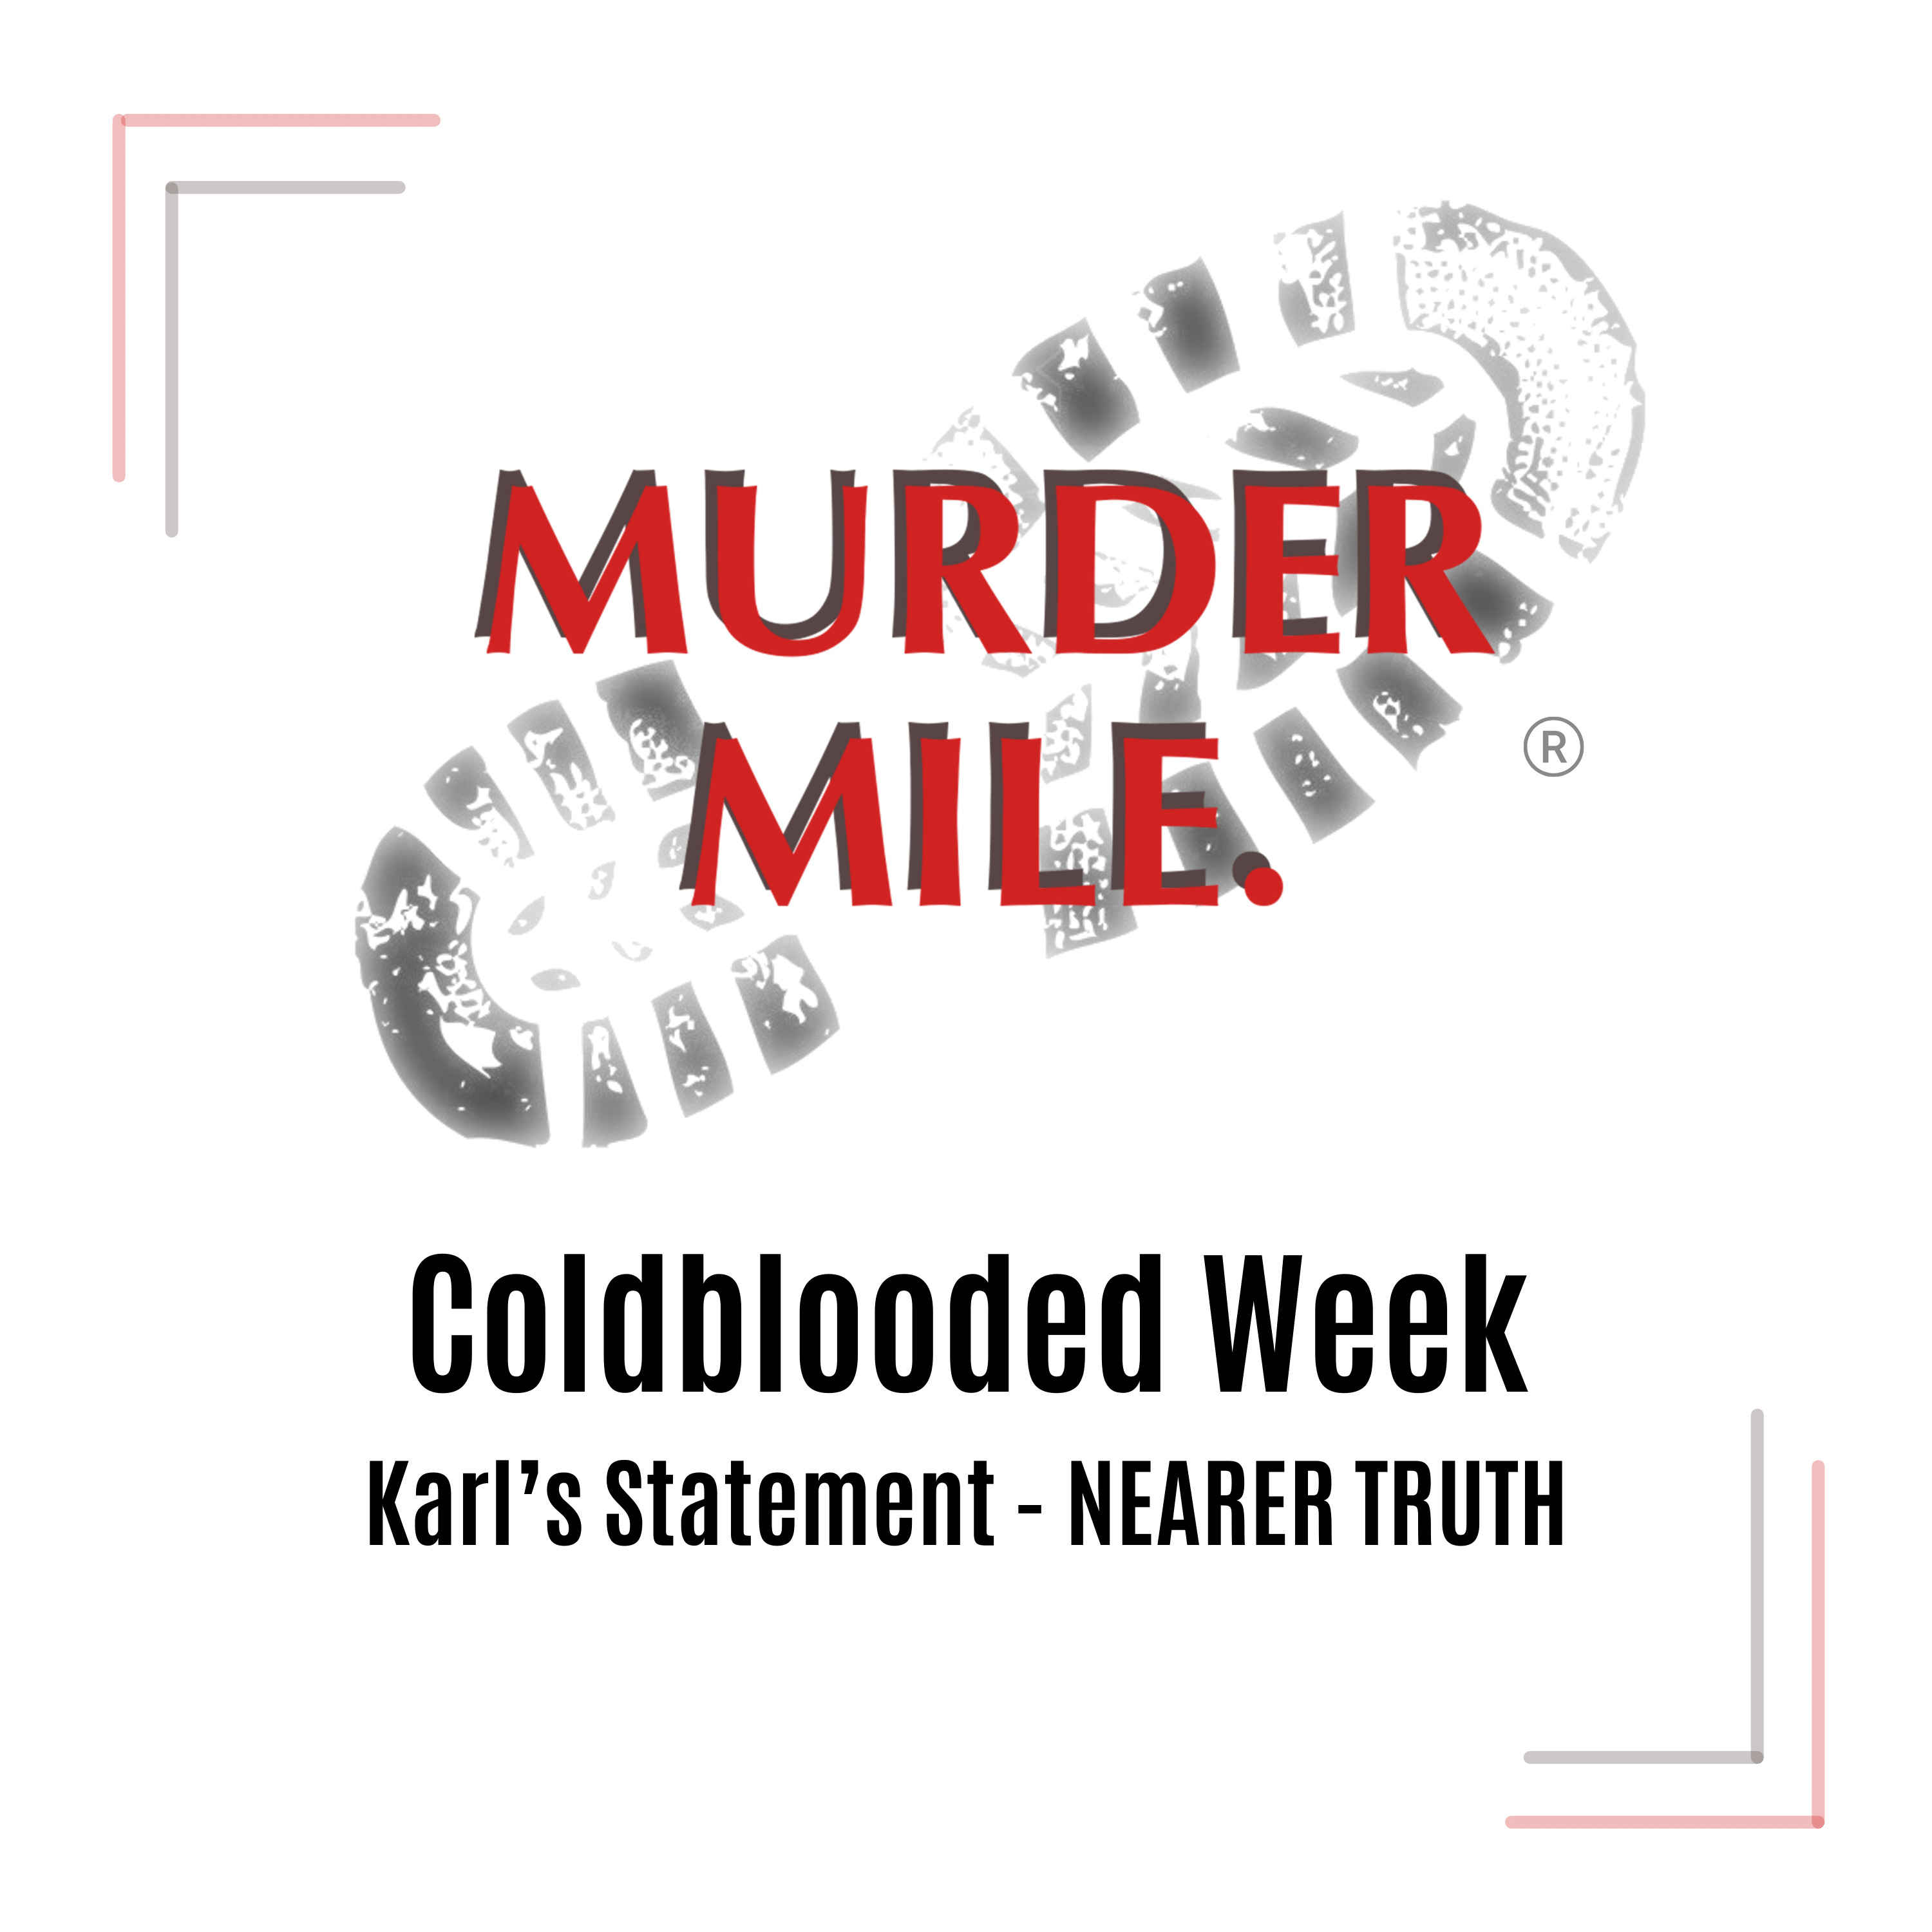 Coldblooded Week - Karl’s Second Statement – NEARER TRUTH